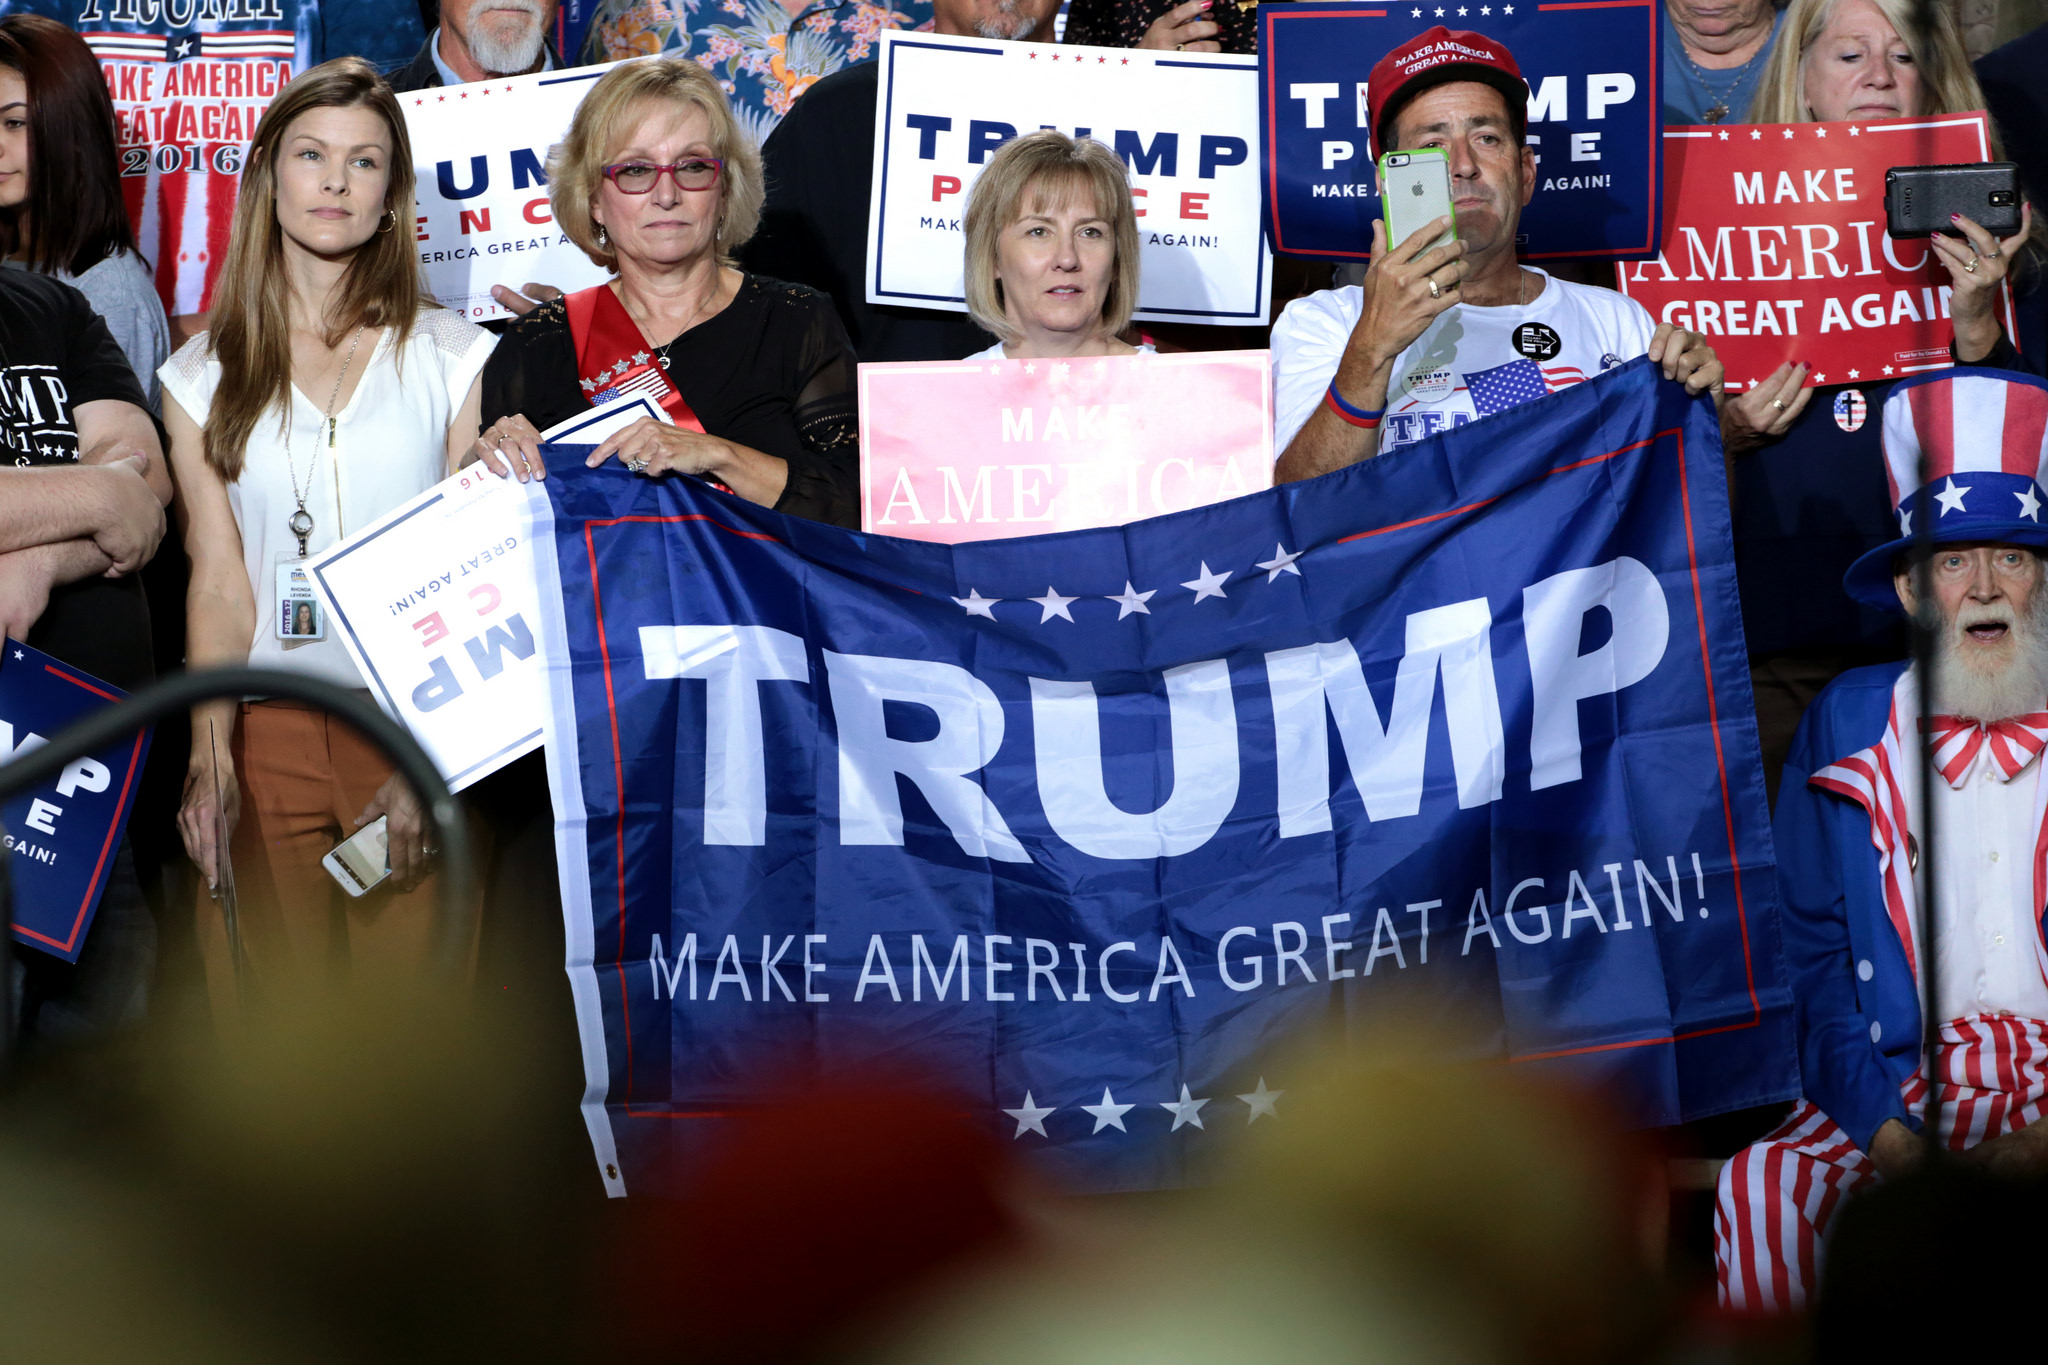 Supporters of Donald Trump at a campaign rally at the Prescott Valley Event Center in Prescott Valley, Arizona. Image credit: Gage Skidmore